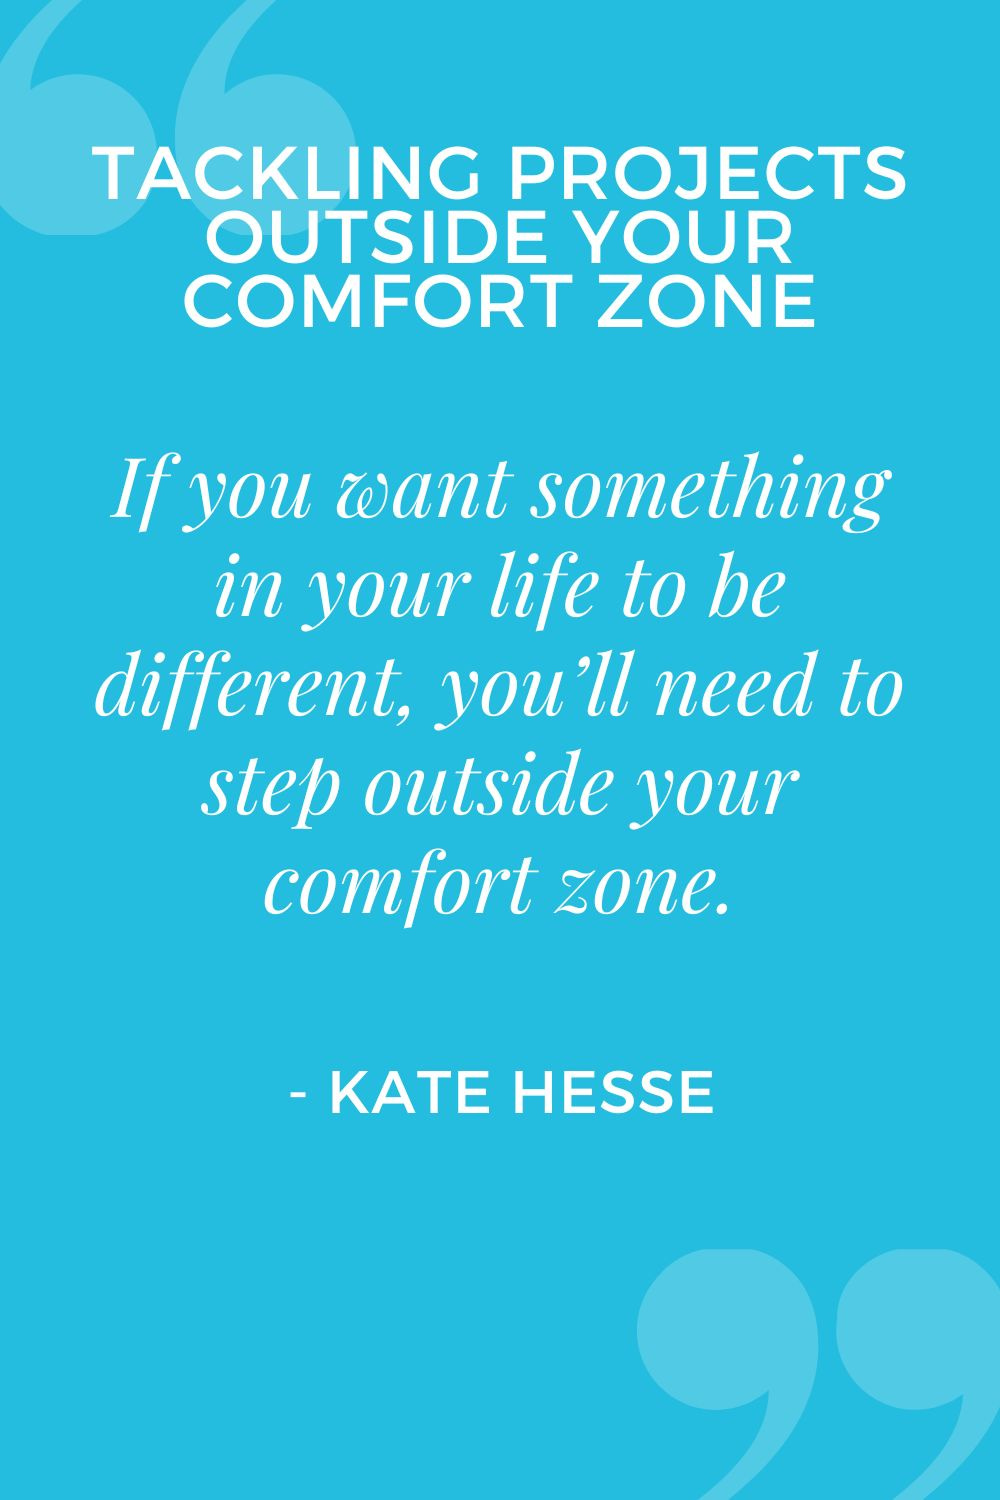 If you want something in your life to be different, you'll need to step outside your comfort zone.